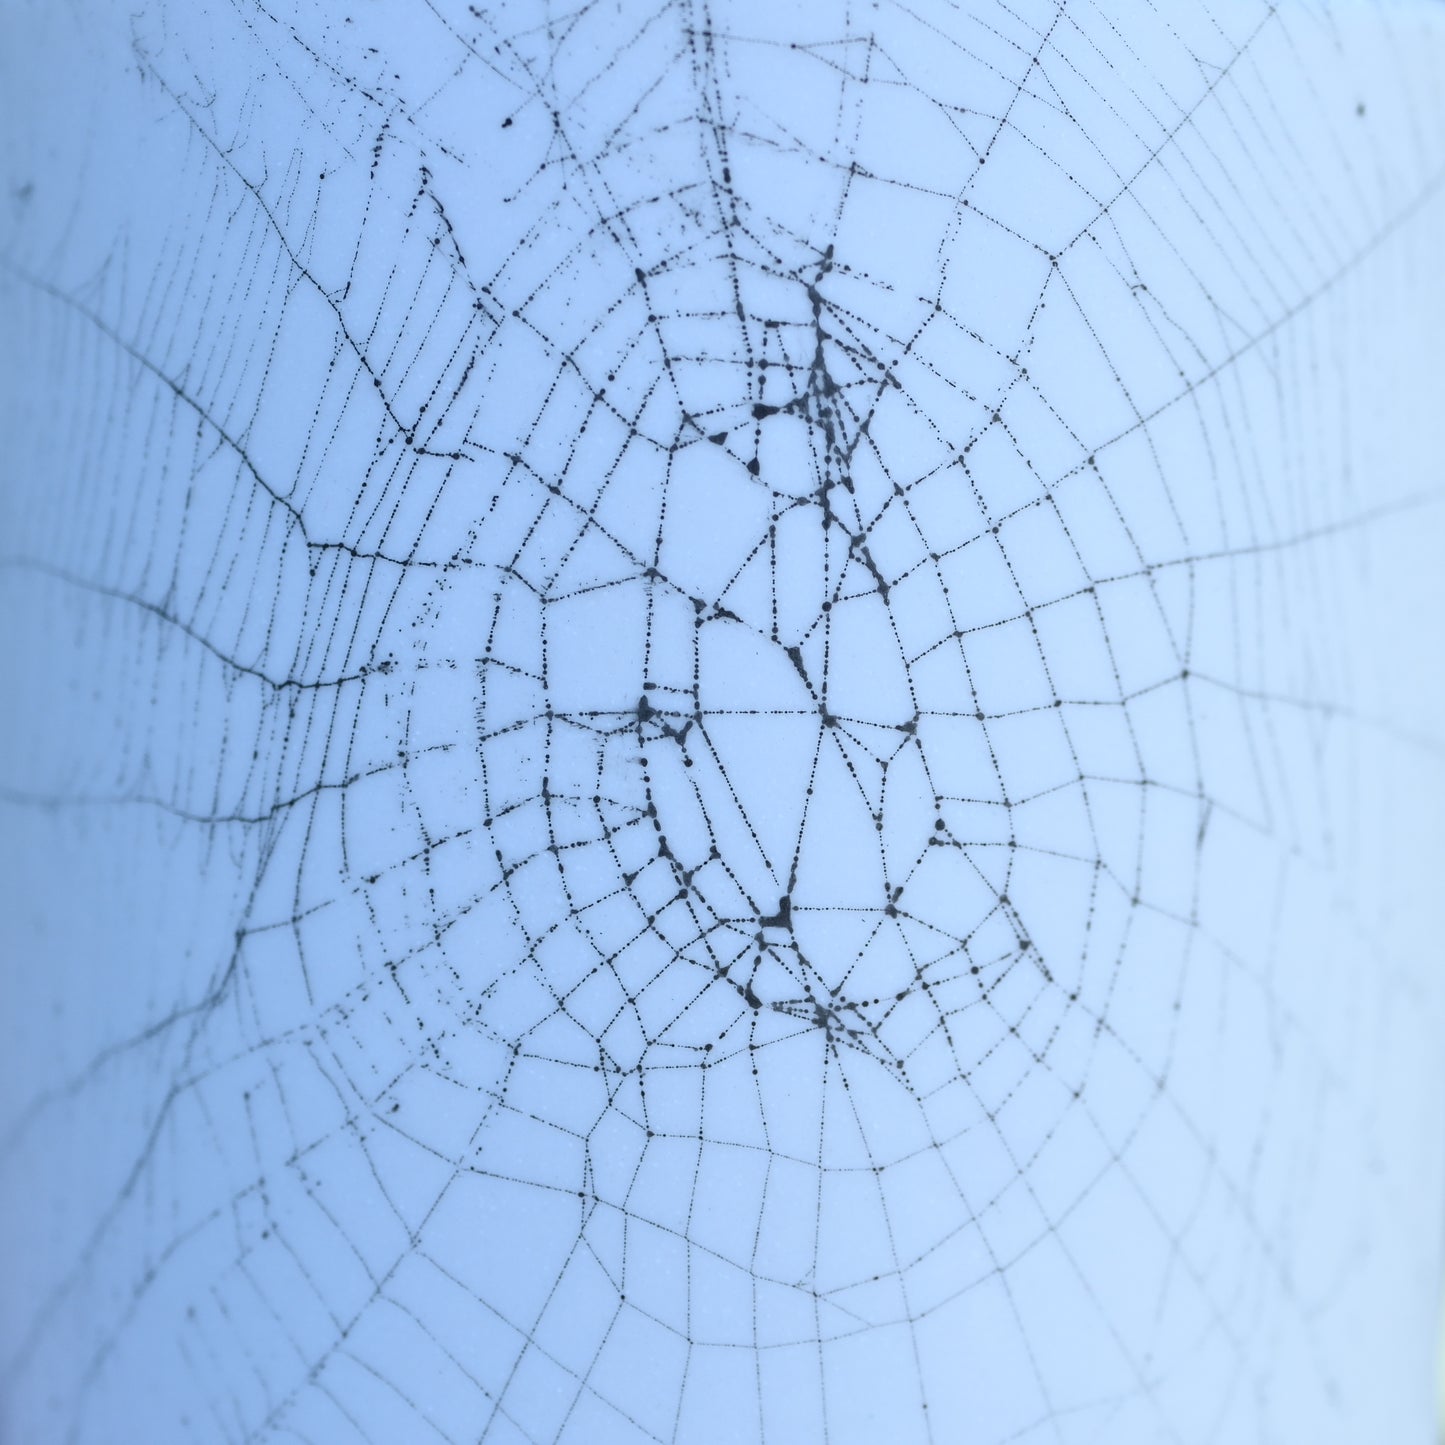 Web on Clay (119), Collected September 07, 2022